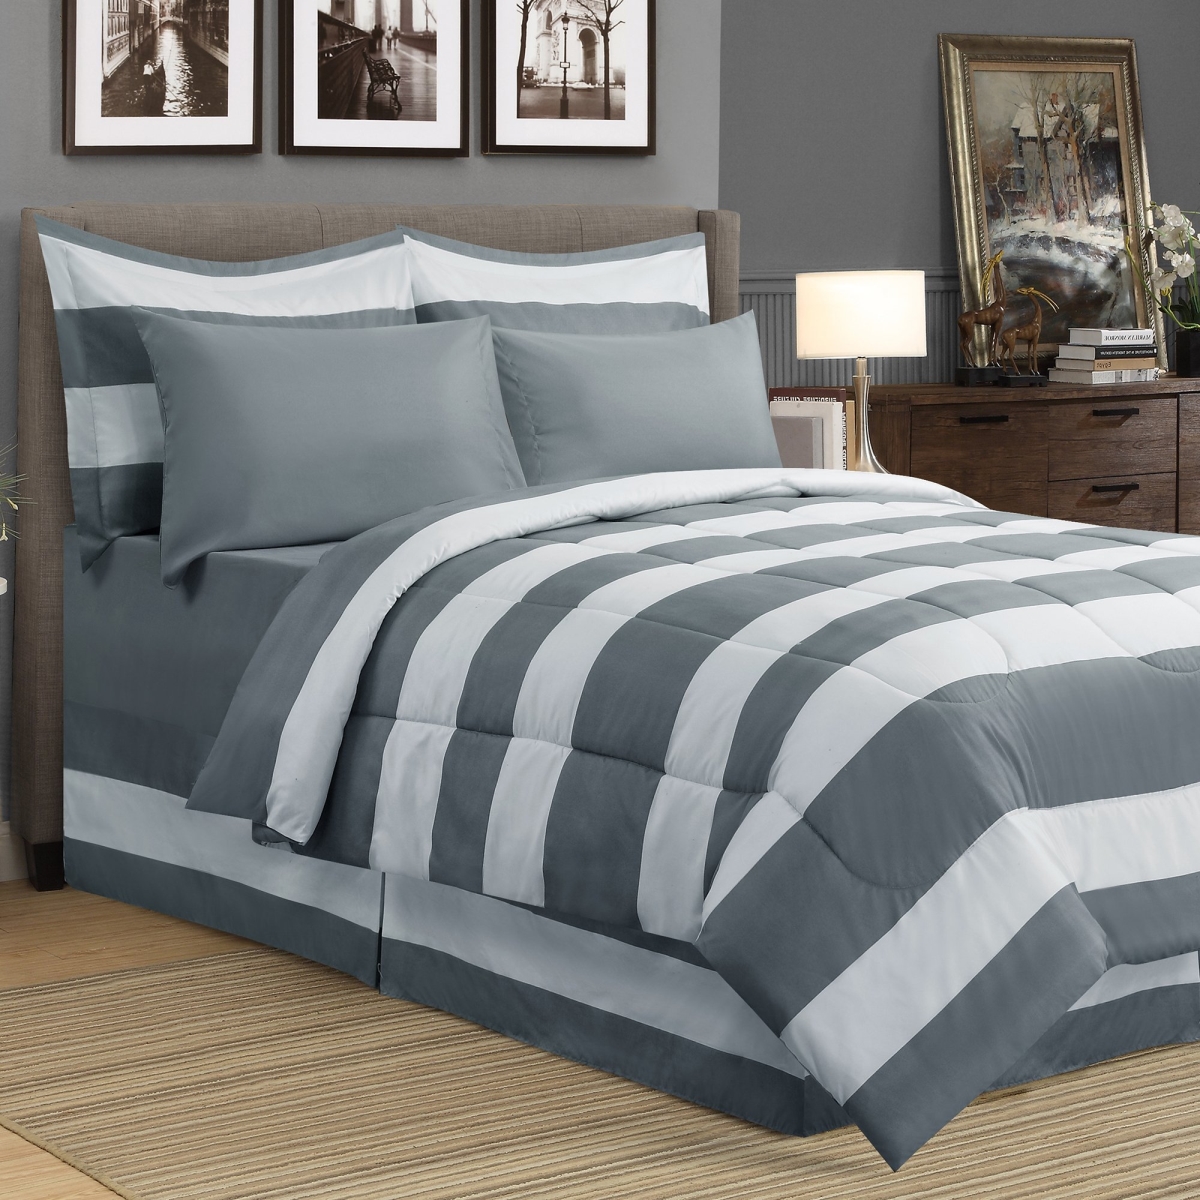 8 Piece Hamshire Bed In A Bag Comforter Set, Grey - King Size